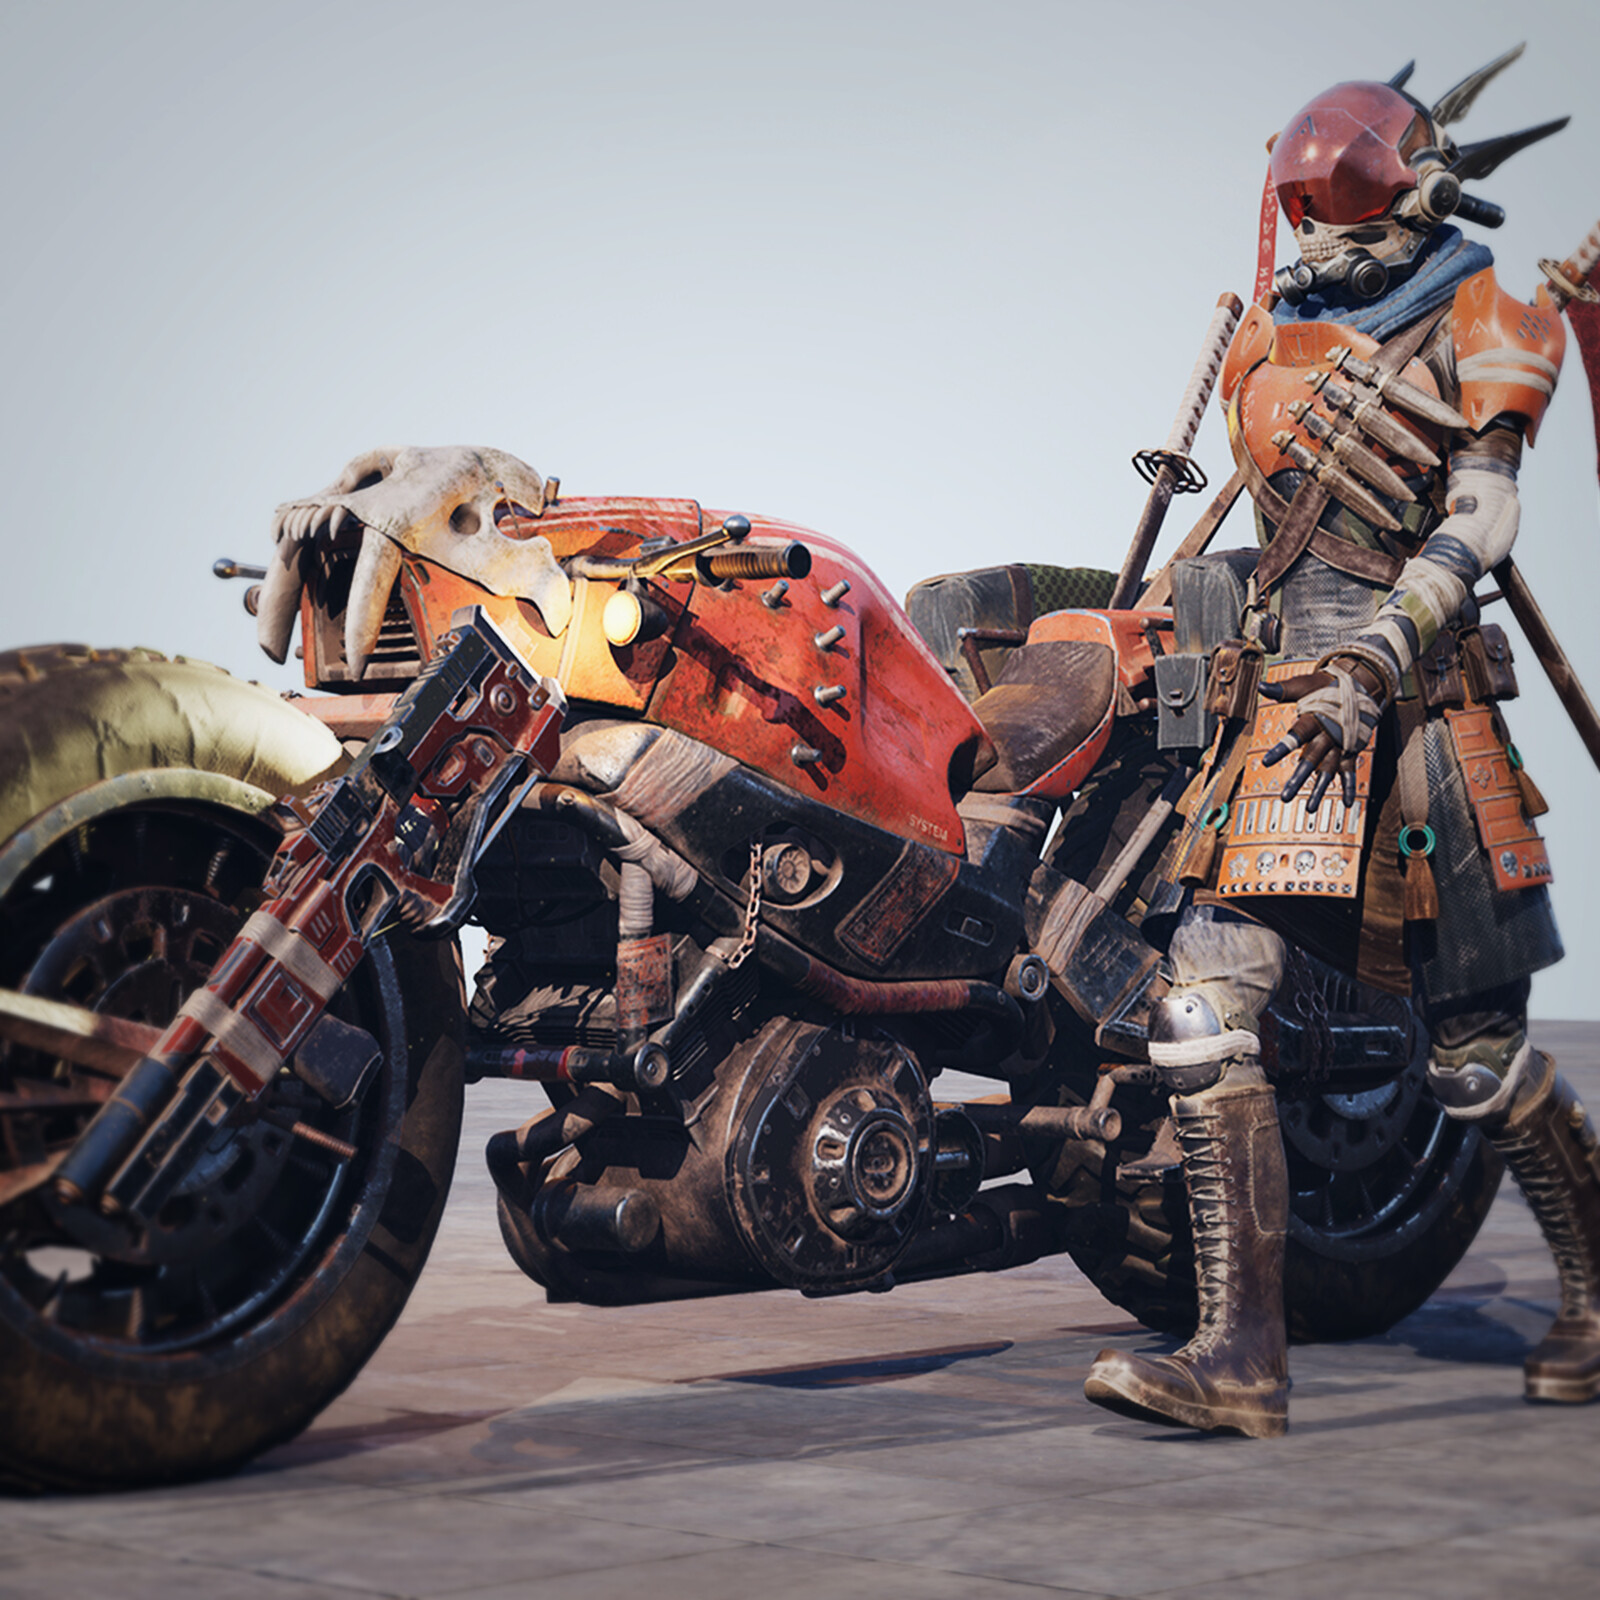 Sci-fi Samurai 3D CG Character and his Mad Max esque motor bike  Real-time UE4 Unreal Engine

Real-time Sci-fi Samurai 3D CG Character UE4 Unreal Engine